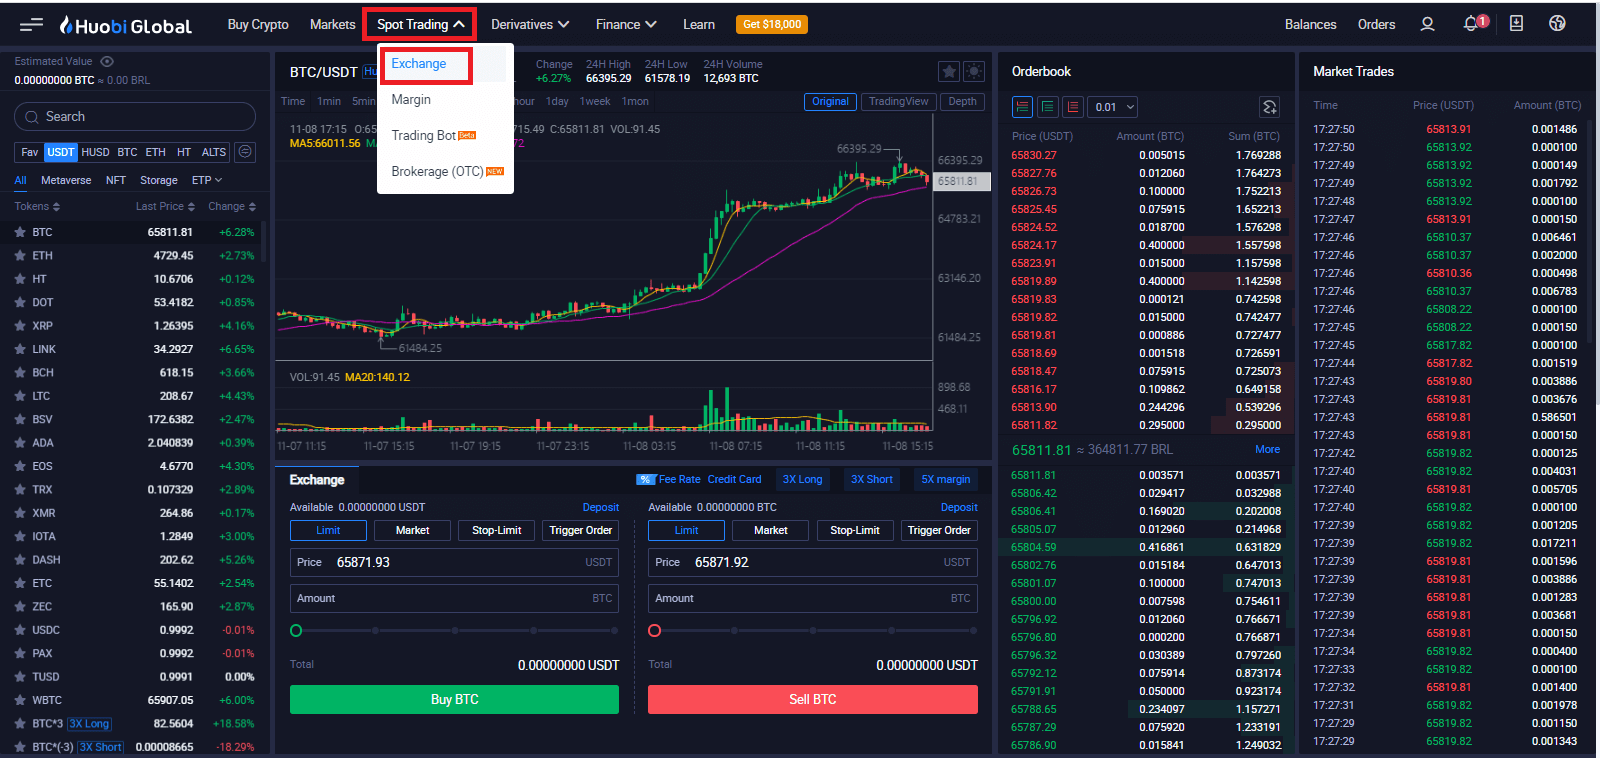 How to Register and Trade Crypto at Huobi